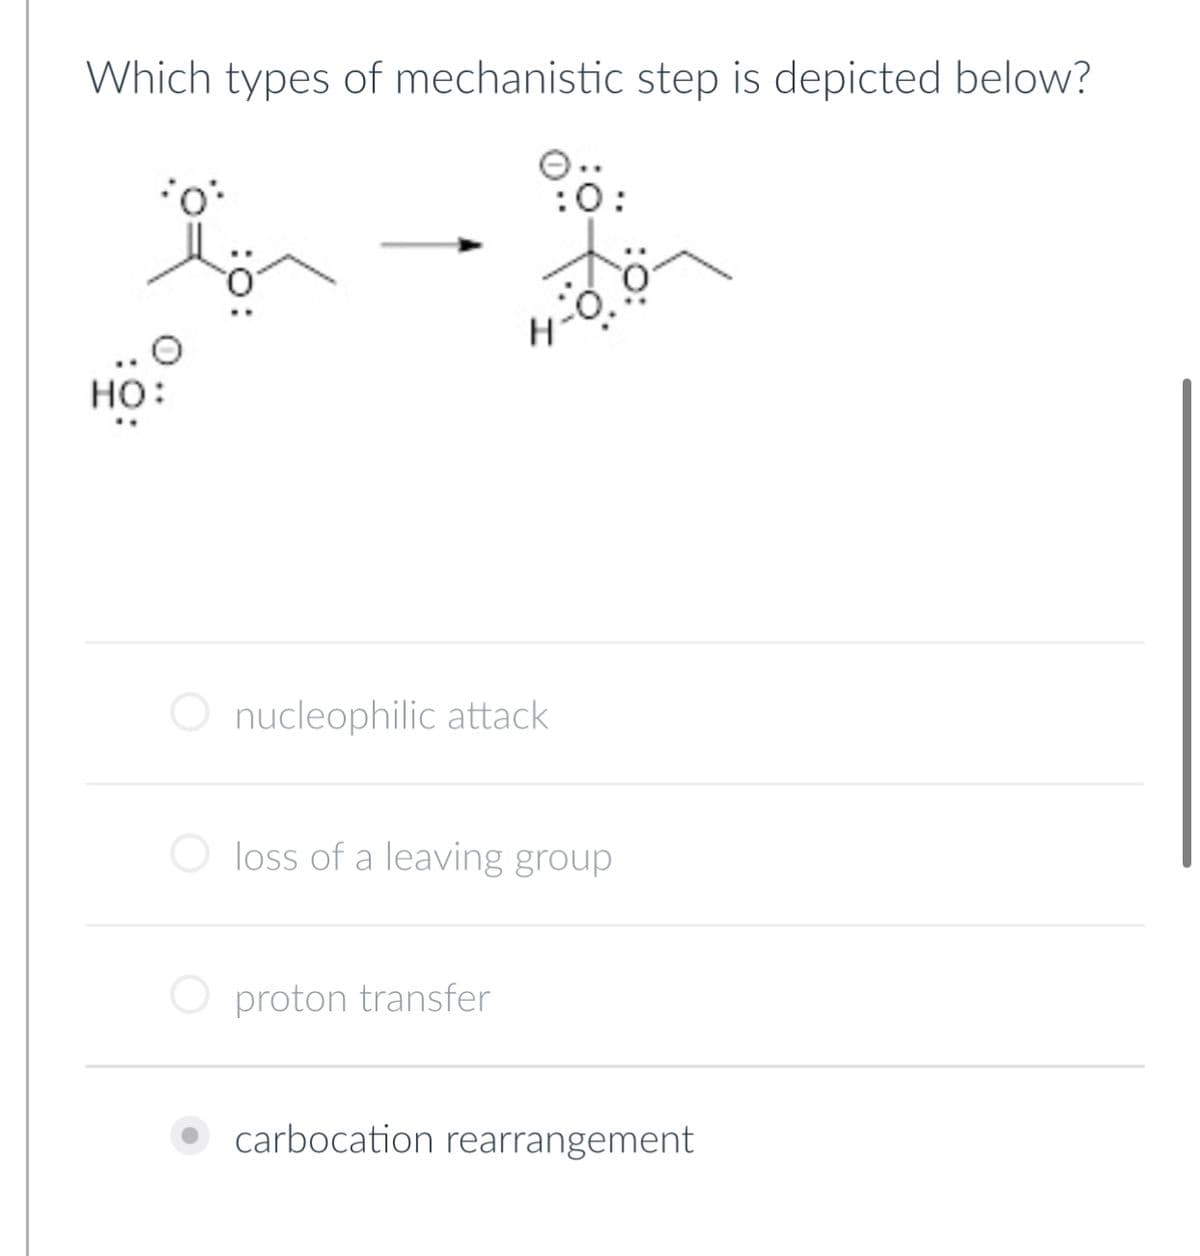 Which types of mechanistic step is depicted below?
HO:
0:
O nucleophilic attack
O loss of a leaving group
O proton transfer
carbocation rearrangement